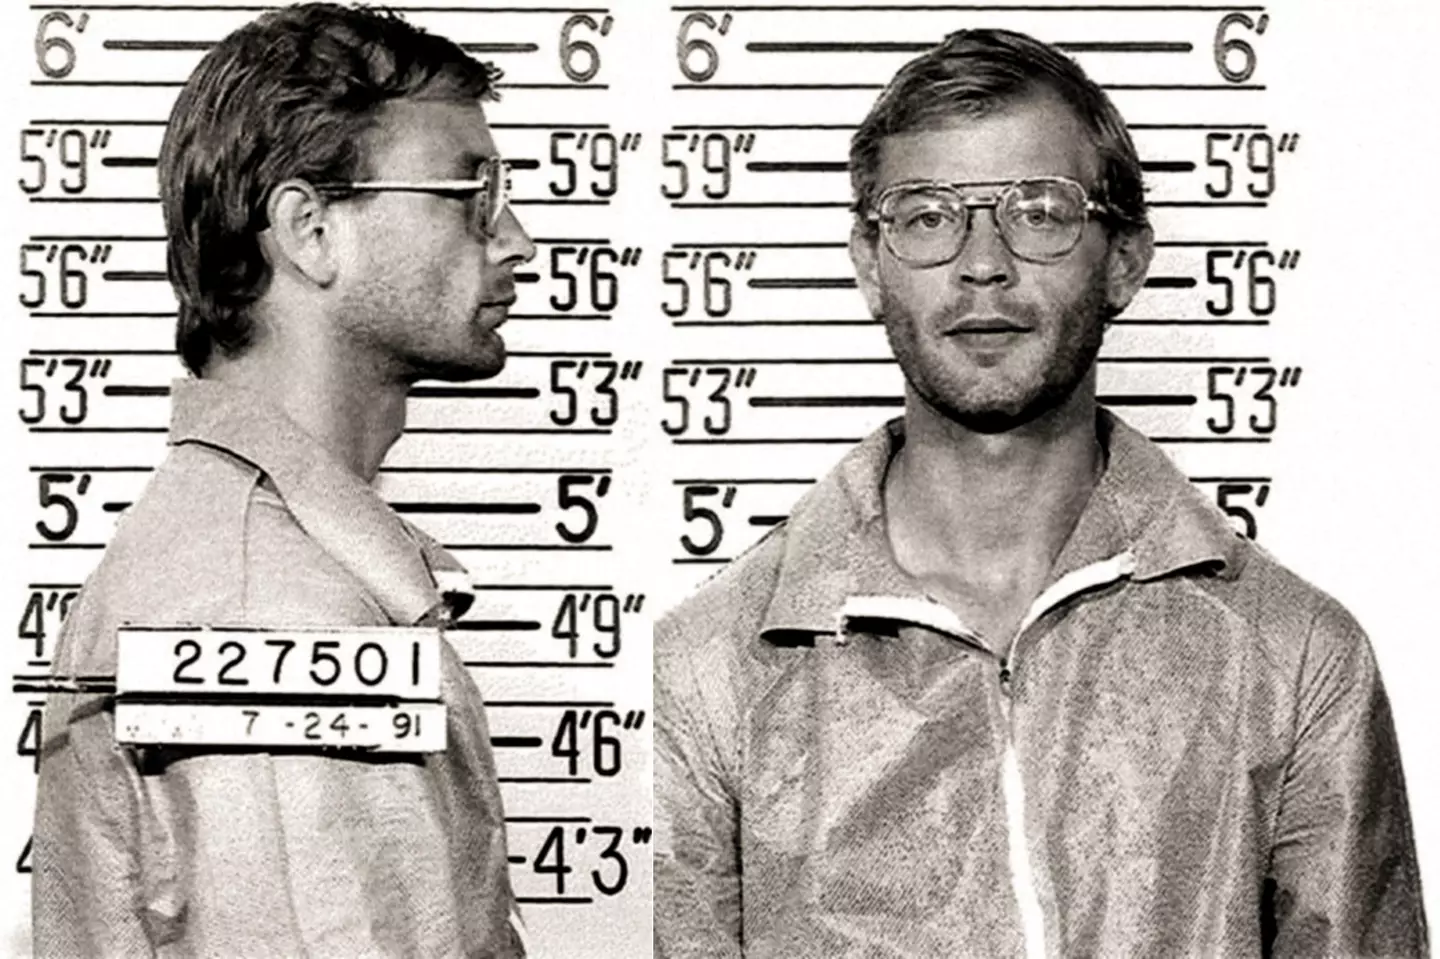 Jeffrey Dahmer was arrested in 1991 for a string of murders.